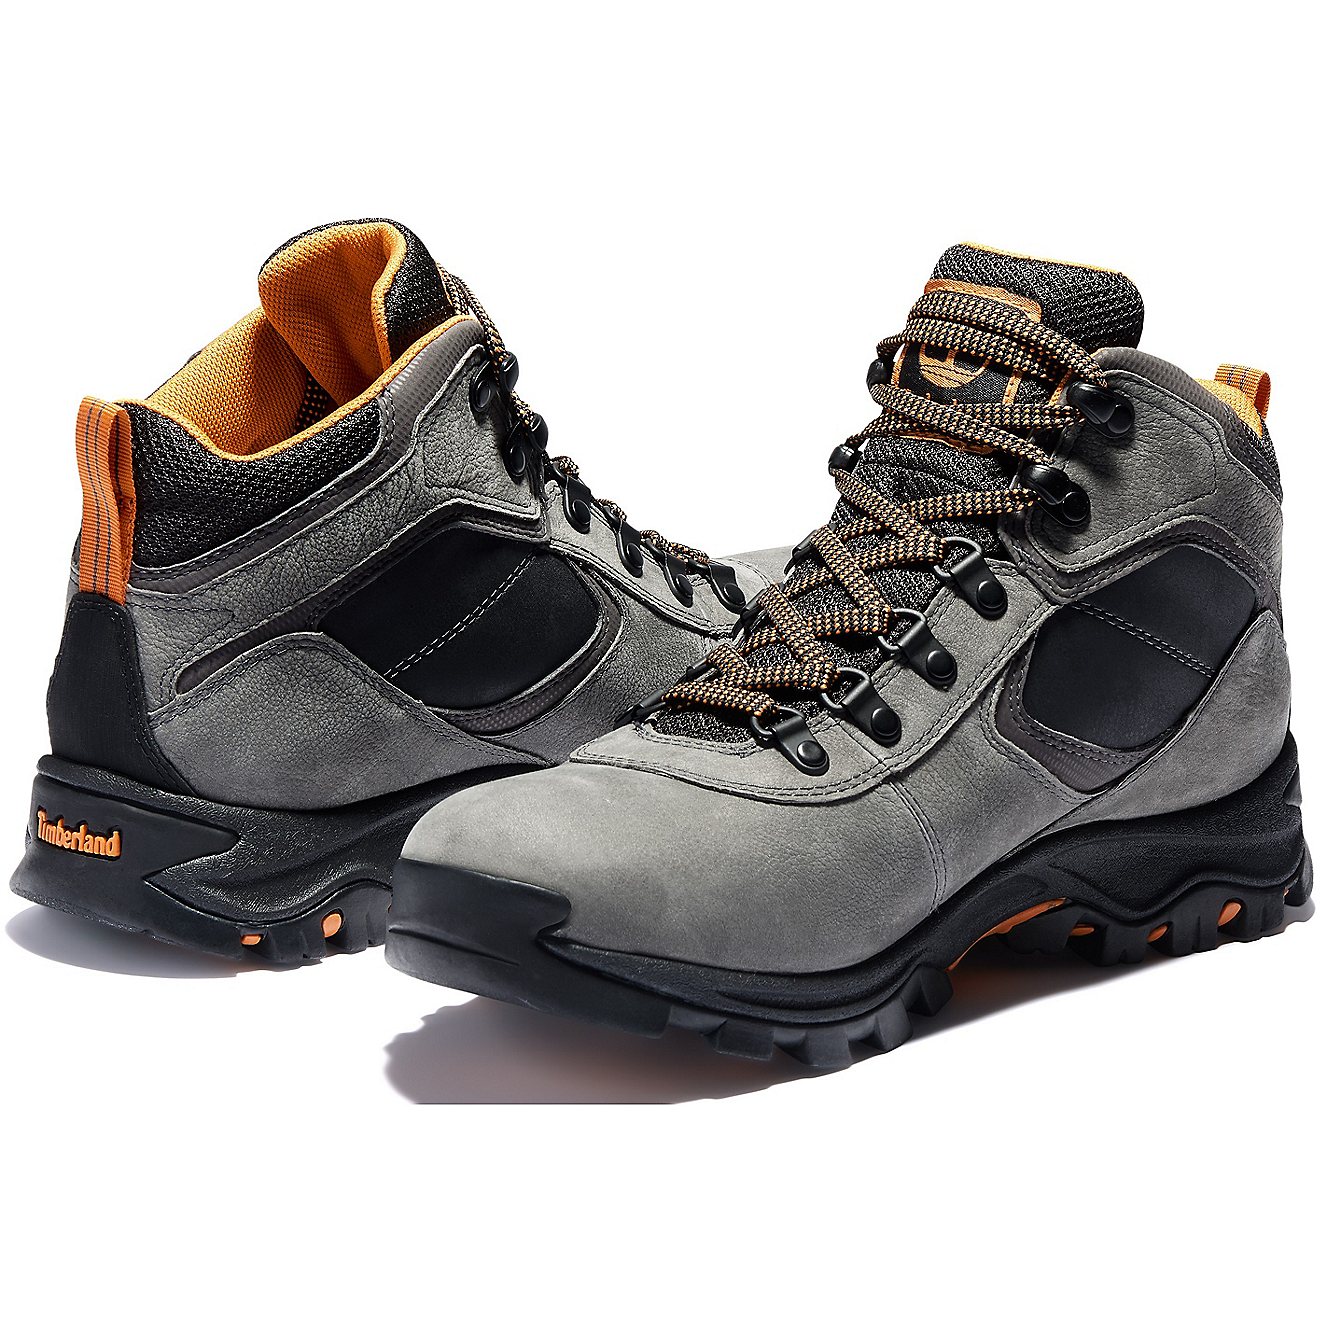 Timberland Men's Mt. Maddsen Waterproof Mid Hiking Boots                                                                         - view number 4